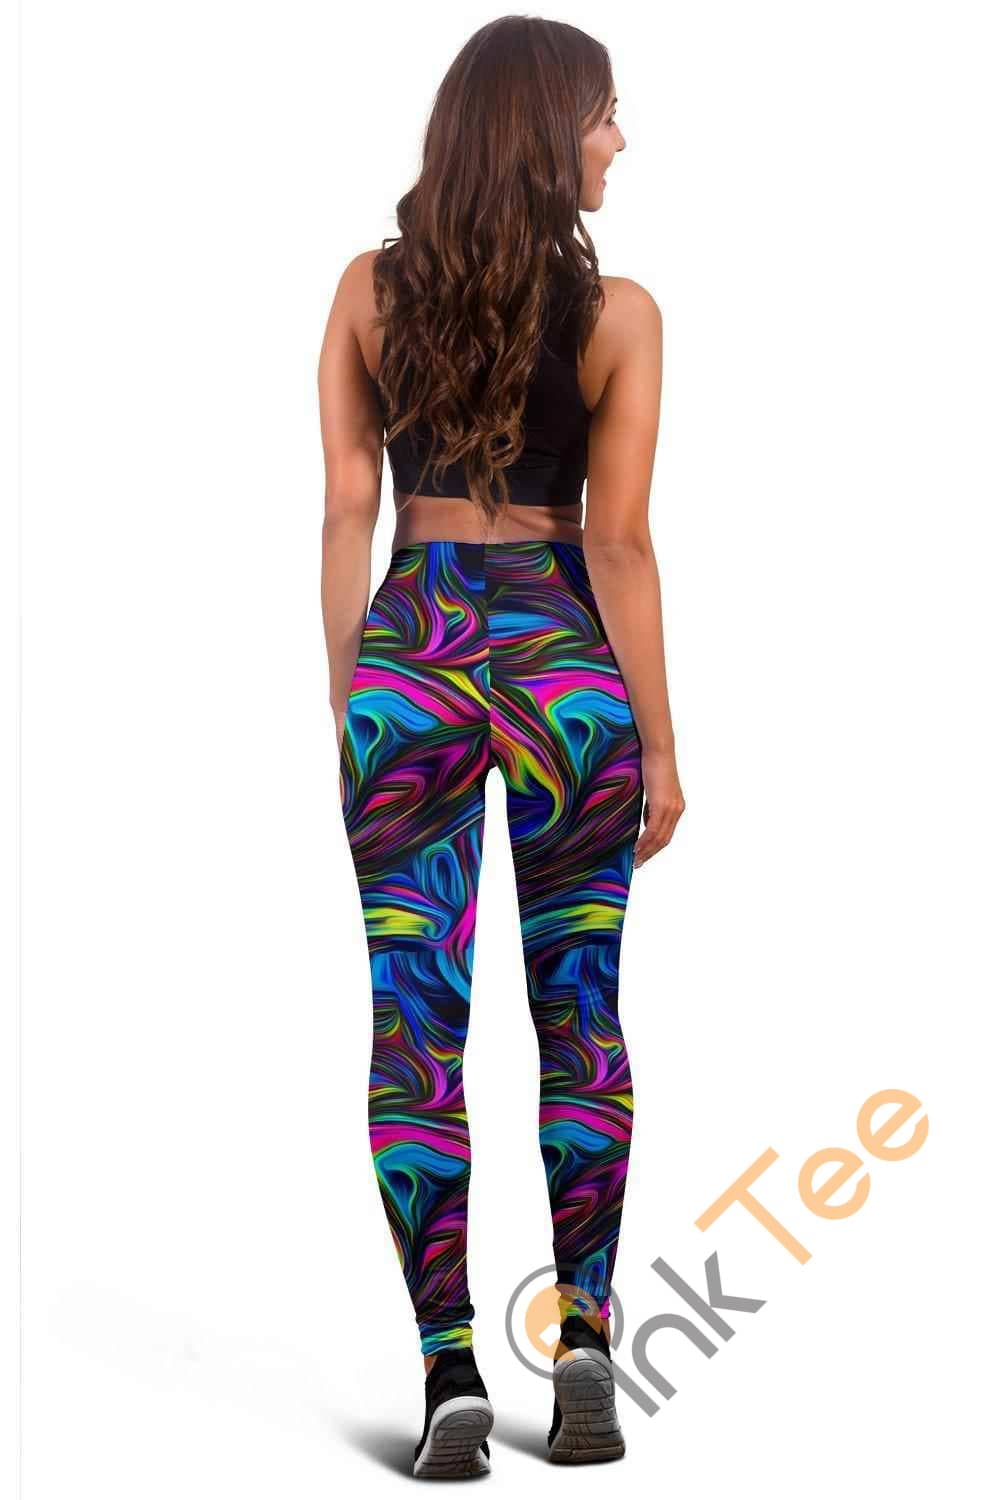 Inktee Store - Psychedelic Art 3D All Over Print For Yoga Fitness Women'S Leggings Image